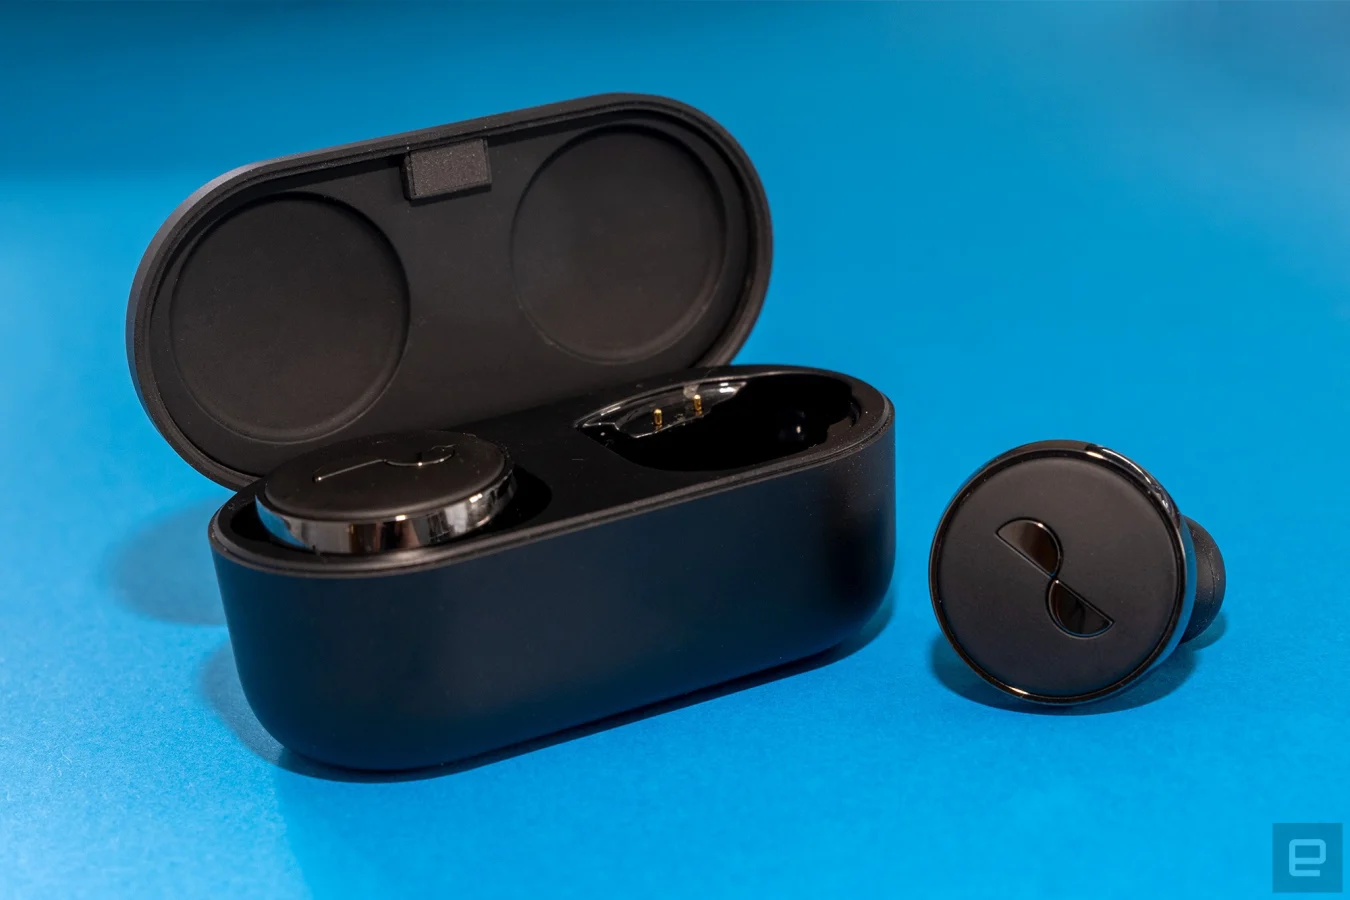 One NuraTrue earbud is pictured beside the charging case.